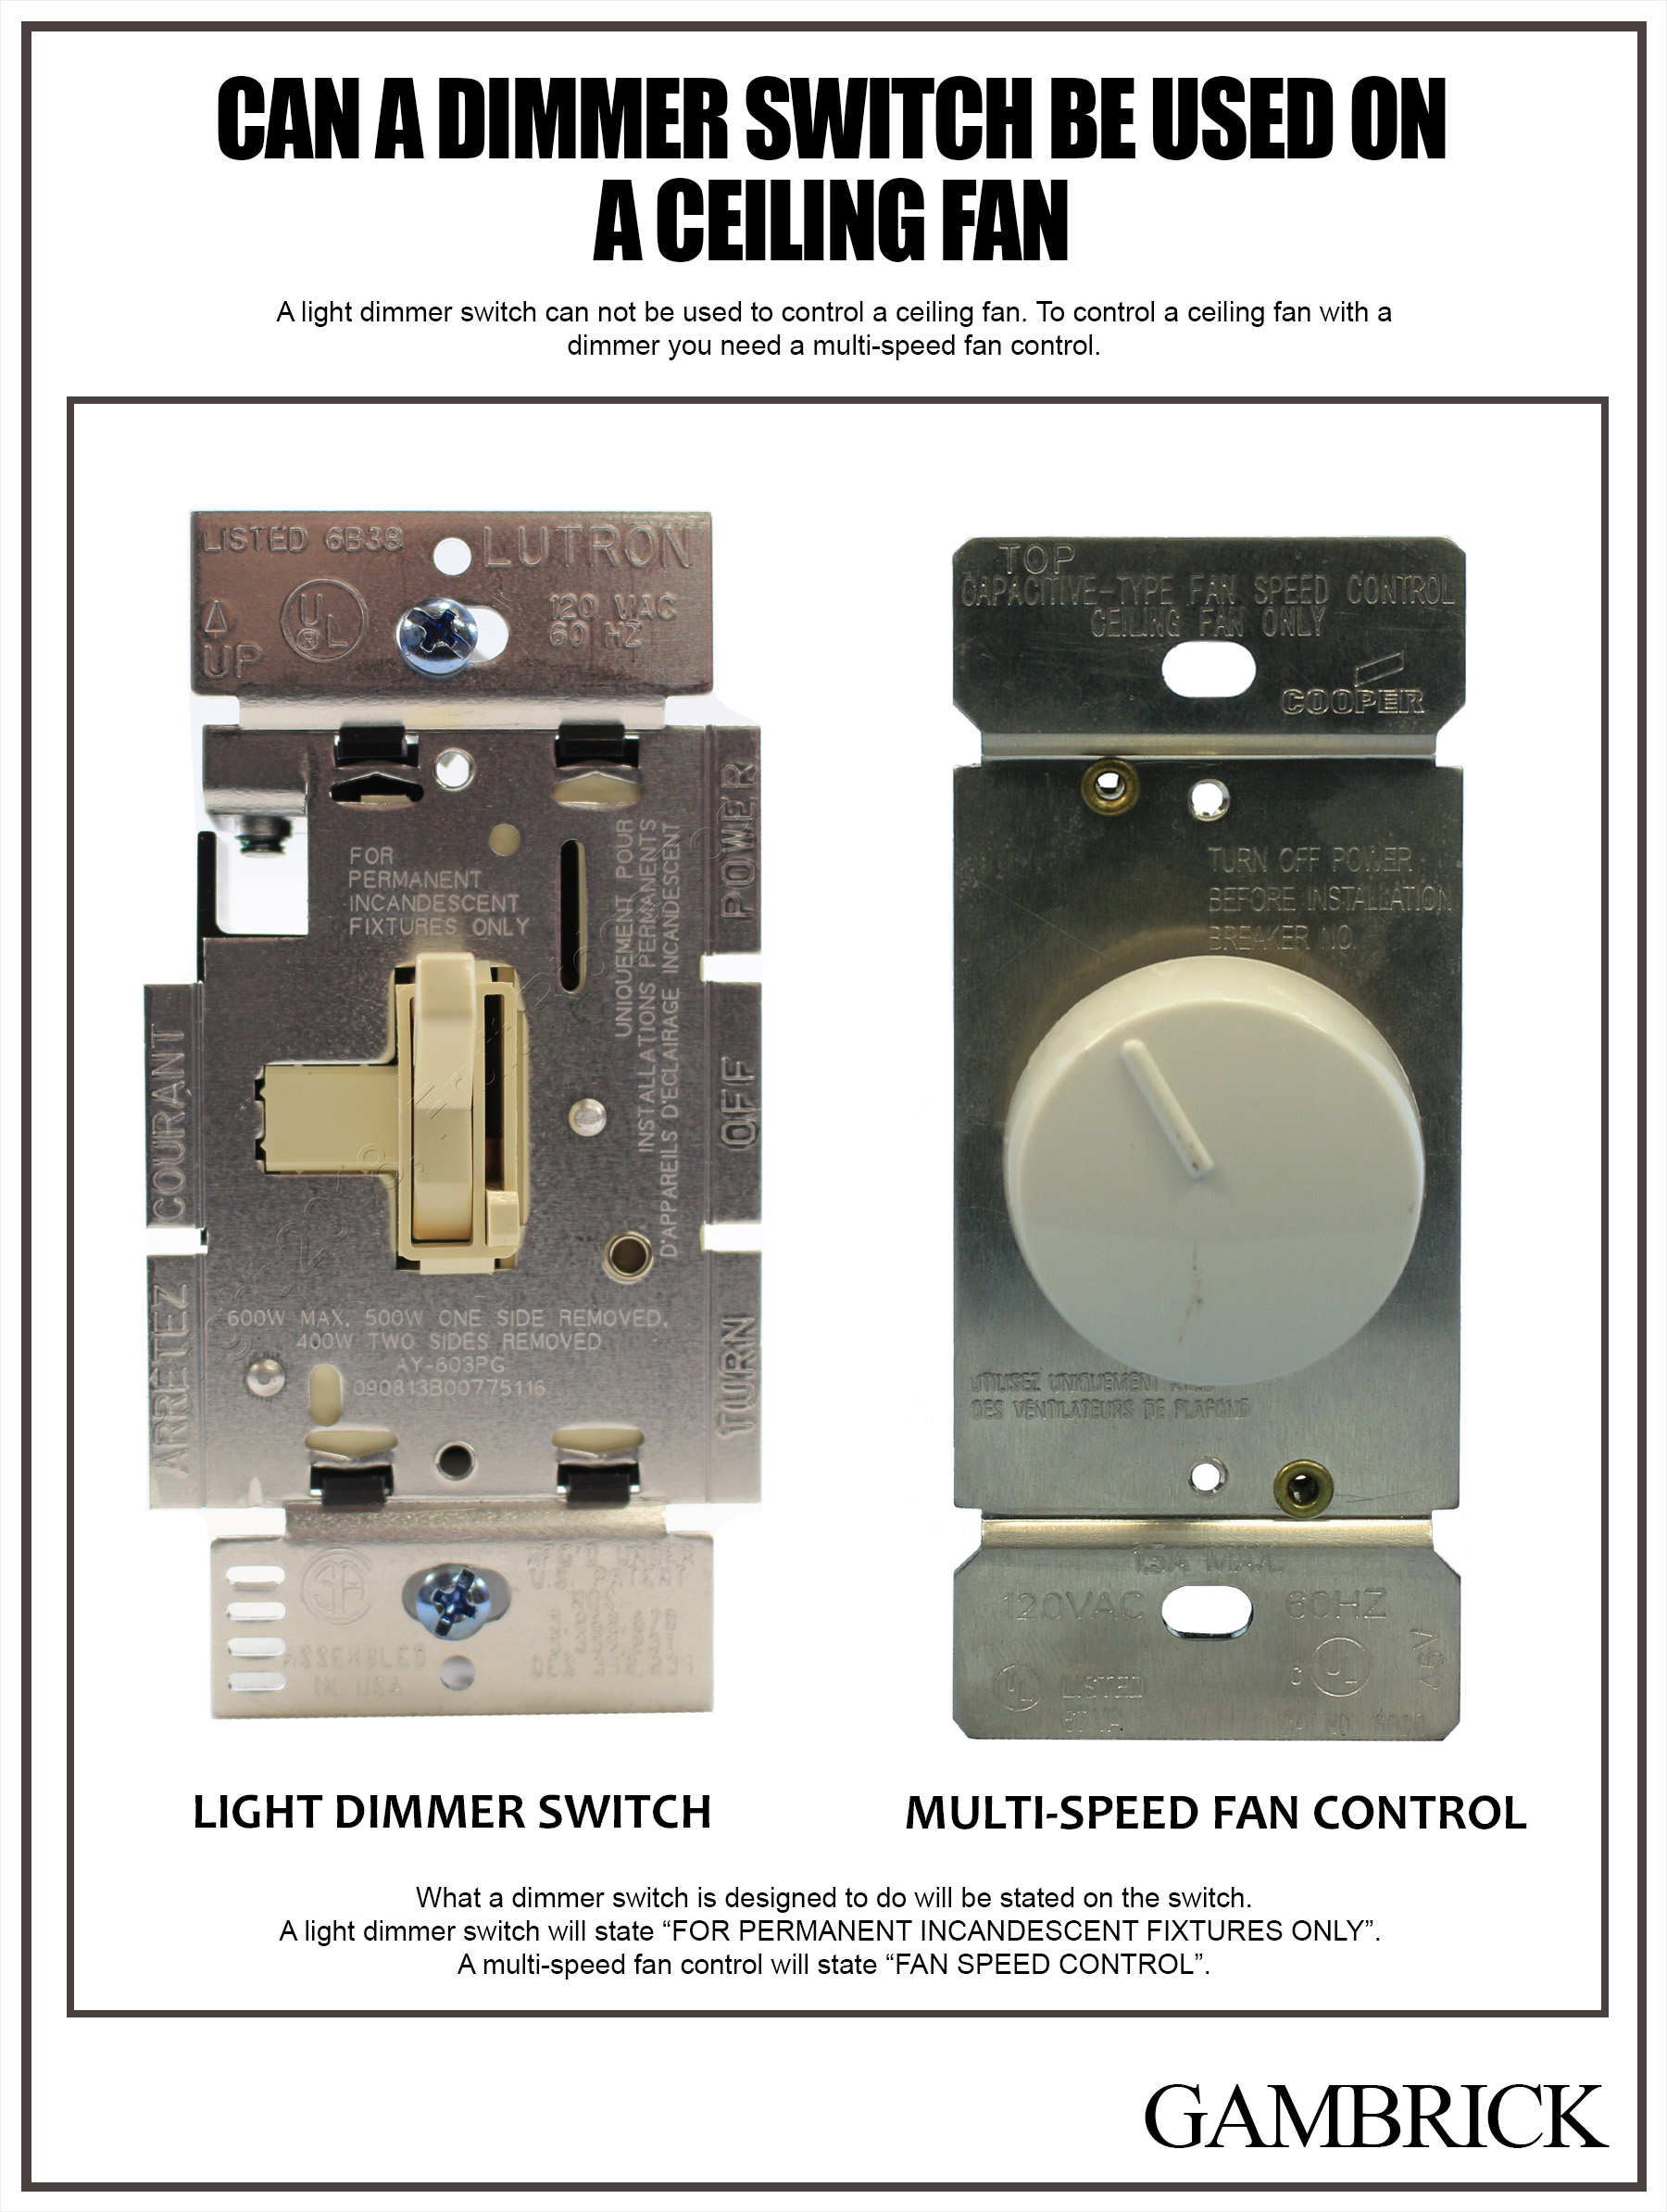 can a dimmer switch be used on a ceiling fan infographic 1.0